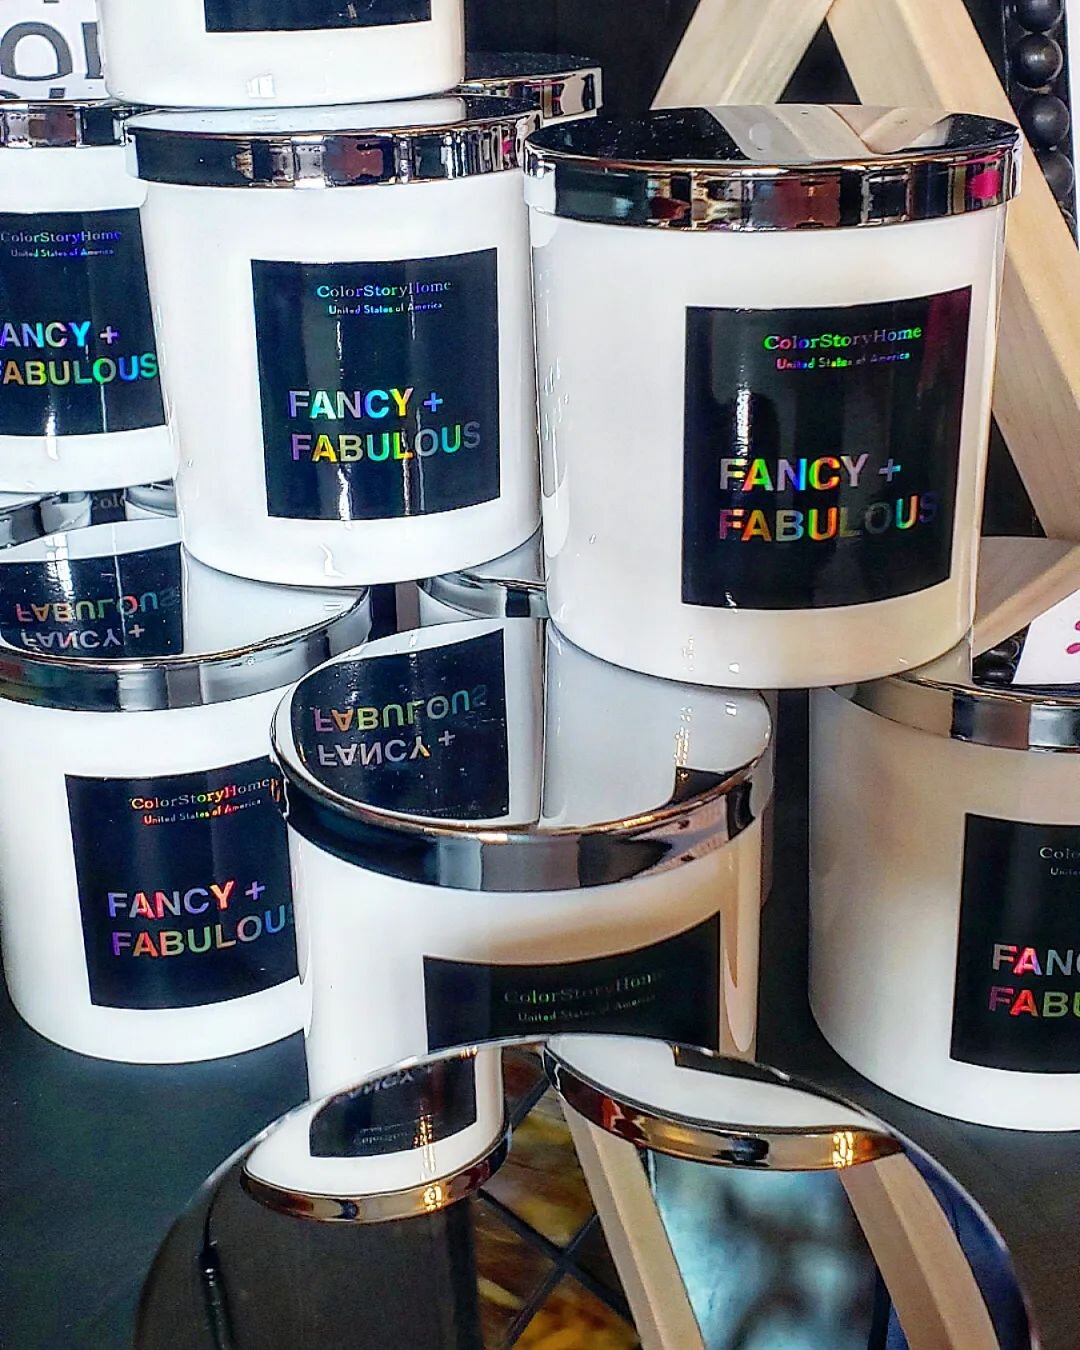 FANCY + FABULOUS for the holidays! 
Your new favorite home fragrance - orange zest, warm clove and knotty pine 🍊☘🌲suits anyone's scent palette perfectly. 

#ecofriendly #soybasedcandle #ColorStoryHome #alifestorybrand #colorismyjam